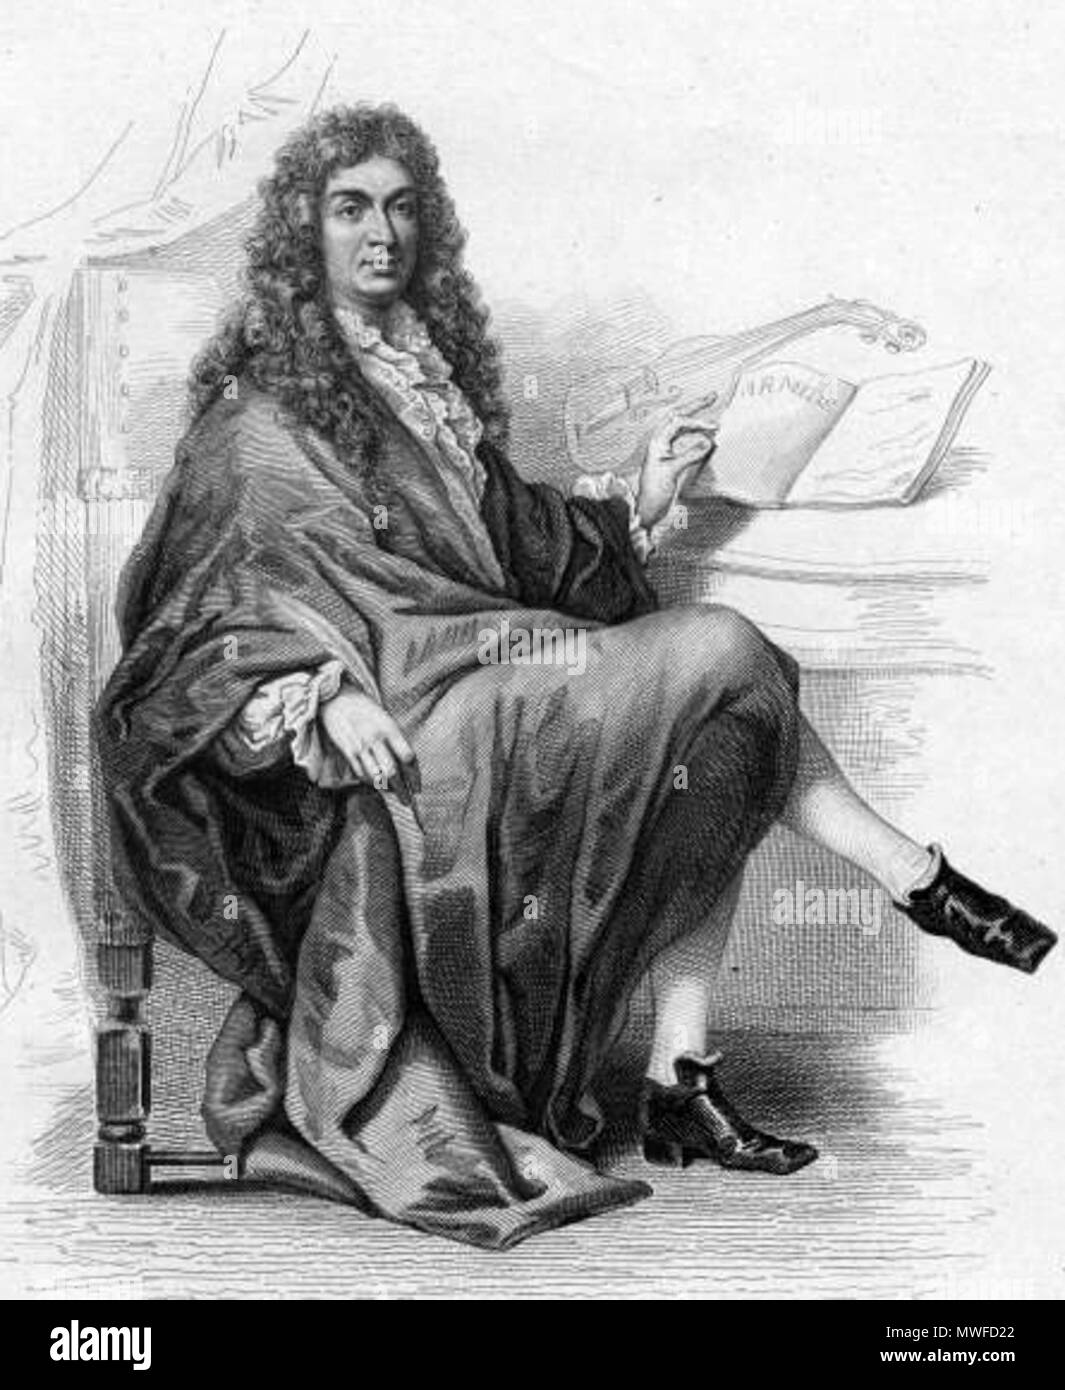 . English: Jean-Baptiste Lully (1632-1687) after a drawing by Tony Johannot (1803-1852). 19th century. Unidentified engraver after Tony Johannot 312 Jean-Baptiste Lully after Tony Johannot Stock Photo